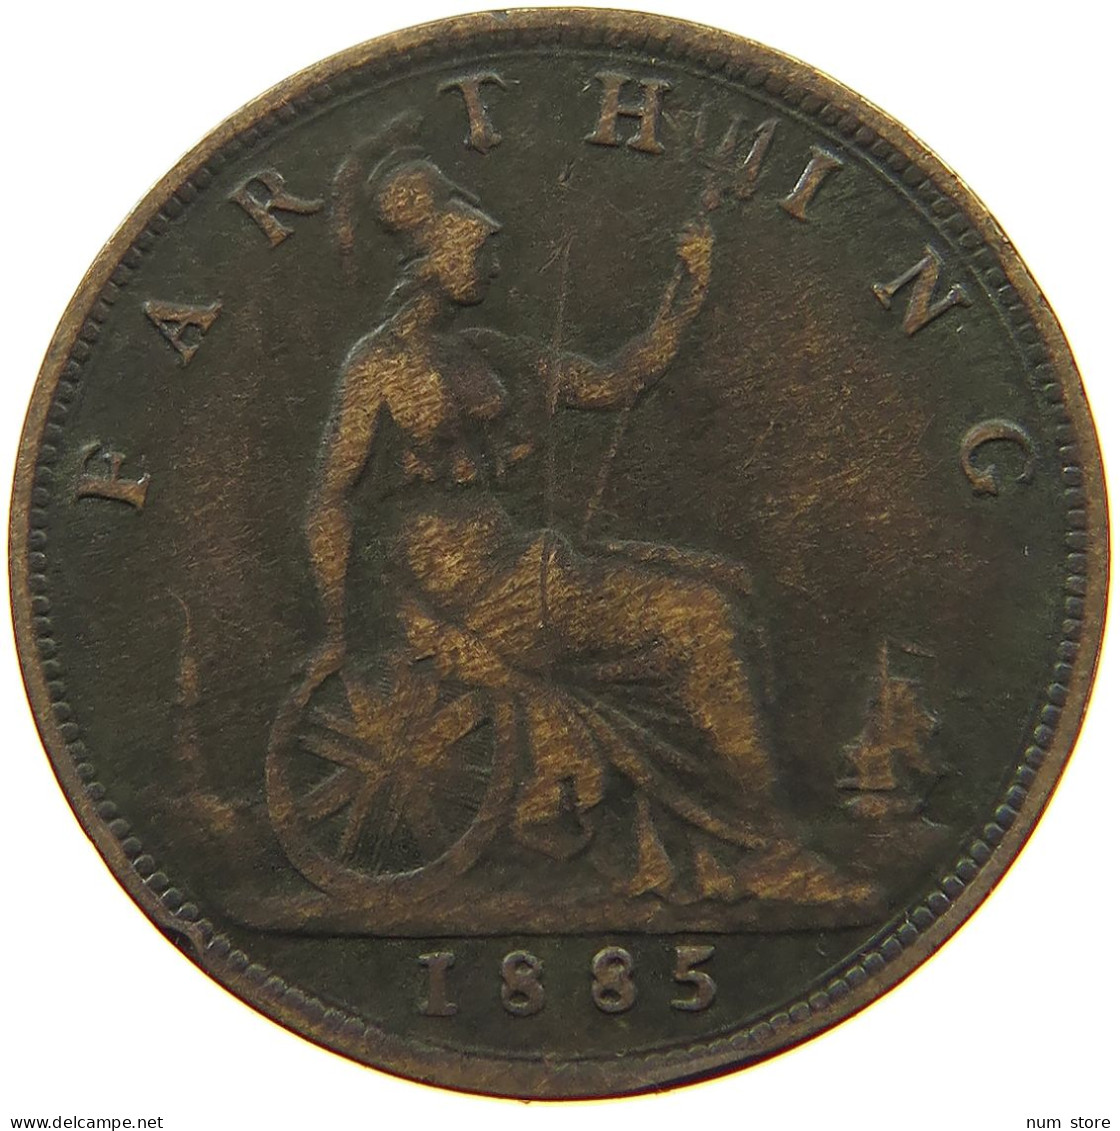 GREAT BRITAIN FARTHING 1885 Victoria 1837-1901 #a011 0865 - B. 1 Farthing